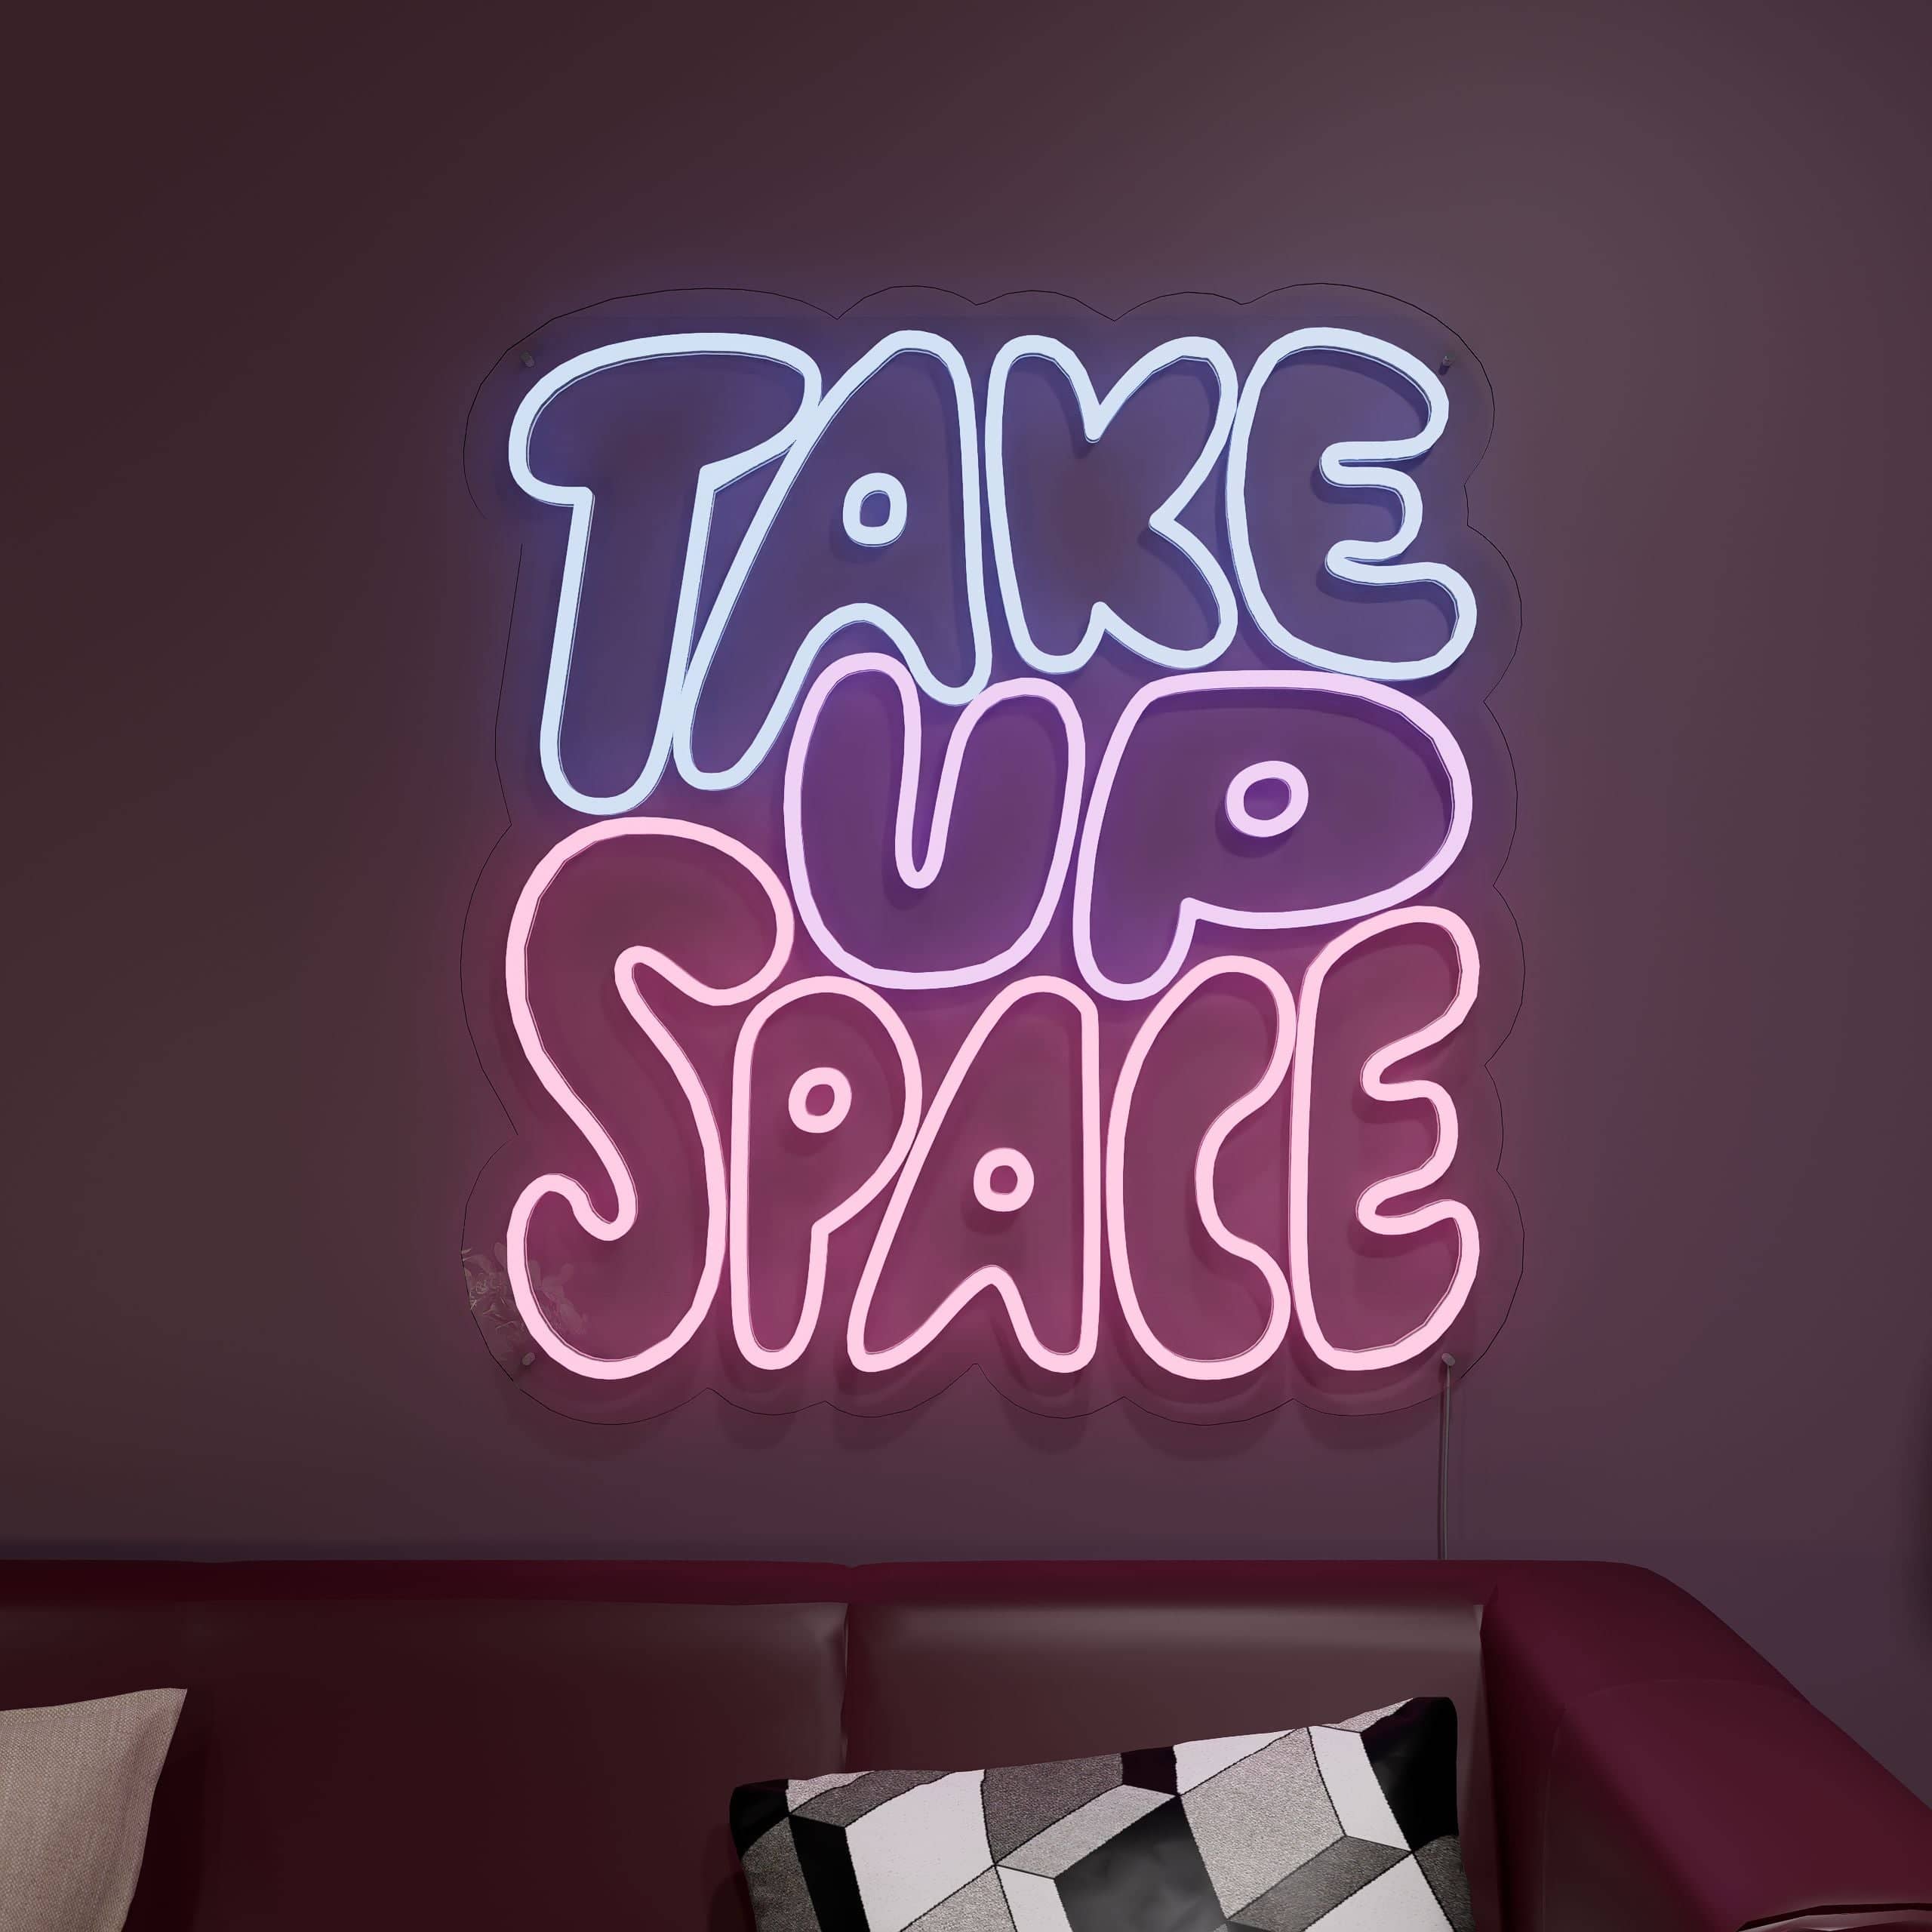 Take up Space, a music-themed neon sign for homes